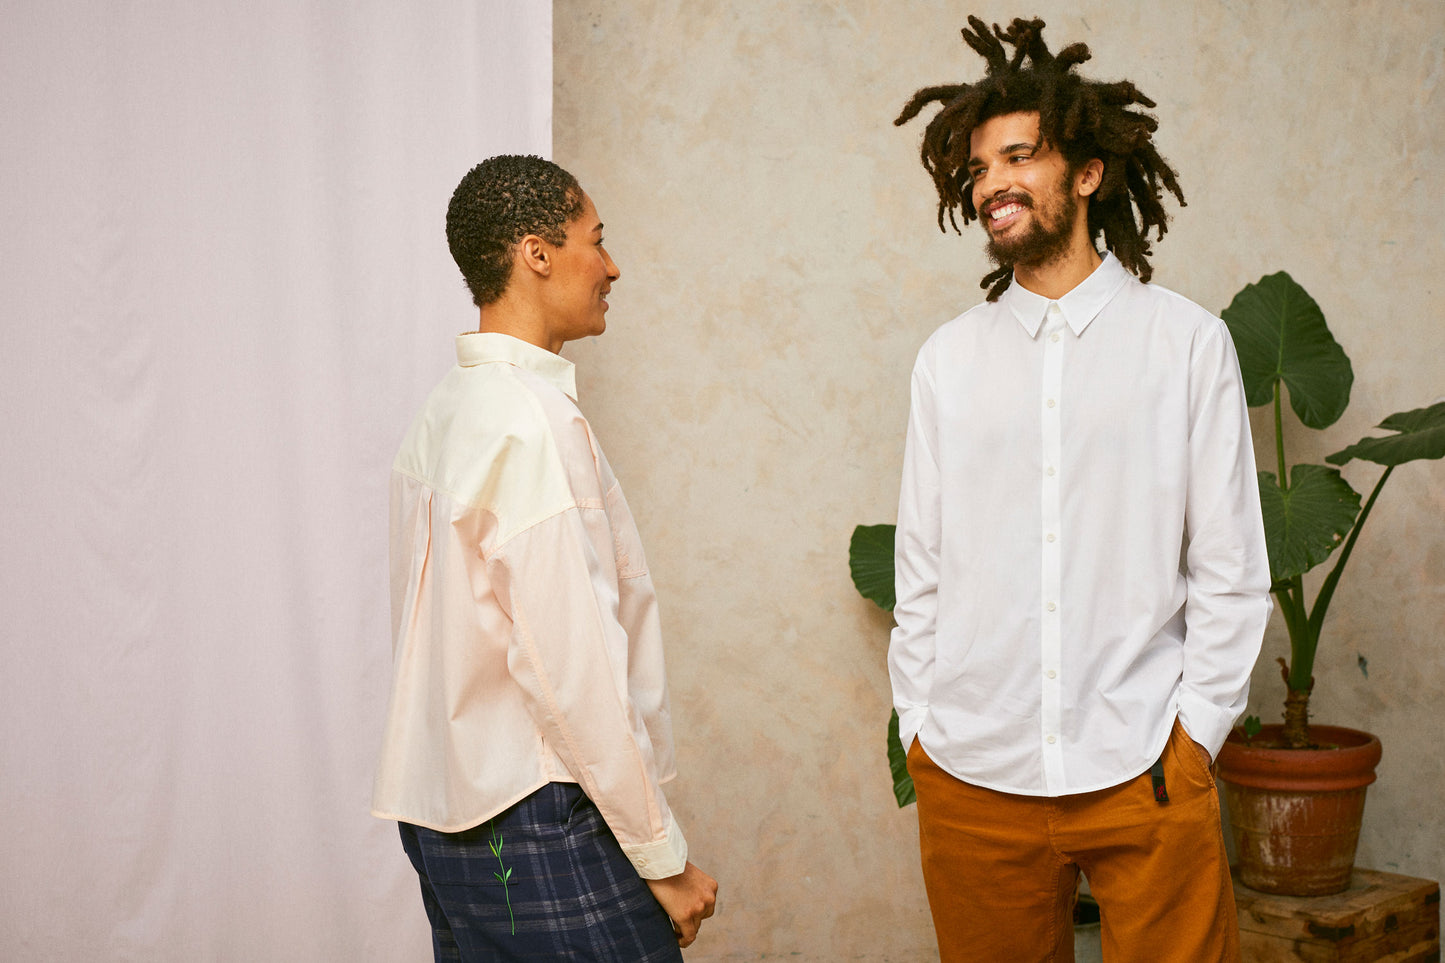 Two models stand laughing and smiling together. The female model has her back angled to the camera, and she wears Saywood's Lela patchwork shirt in pastel orange and yellow. The male model faces her, wearing Saywood's white mens shirt.